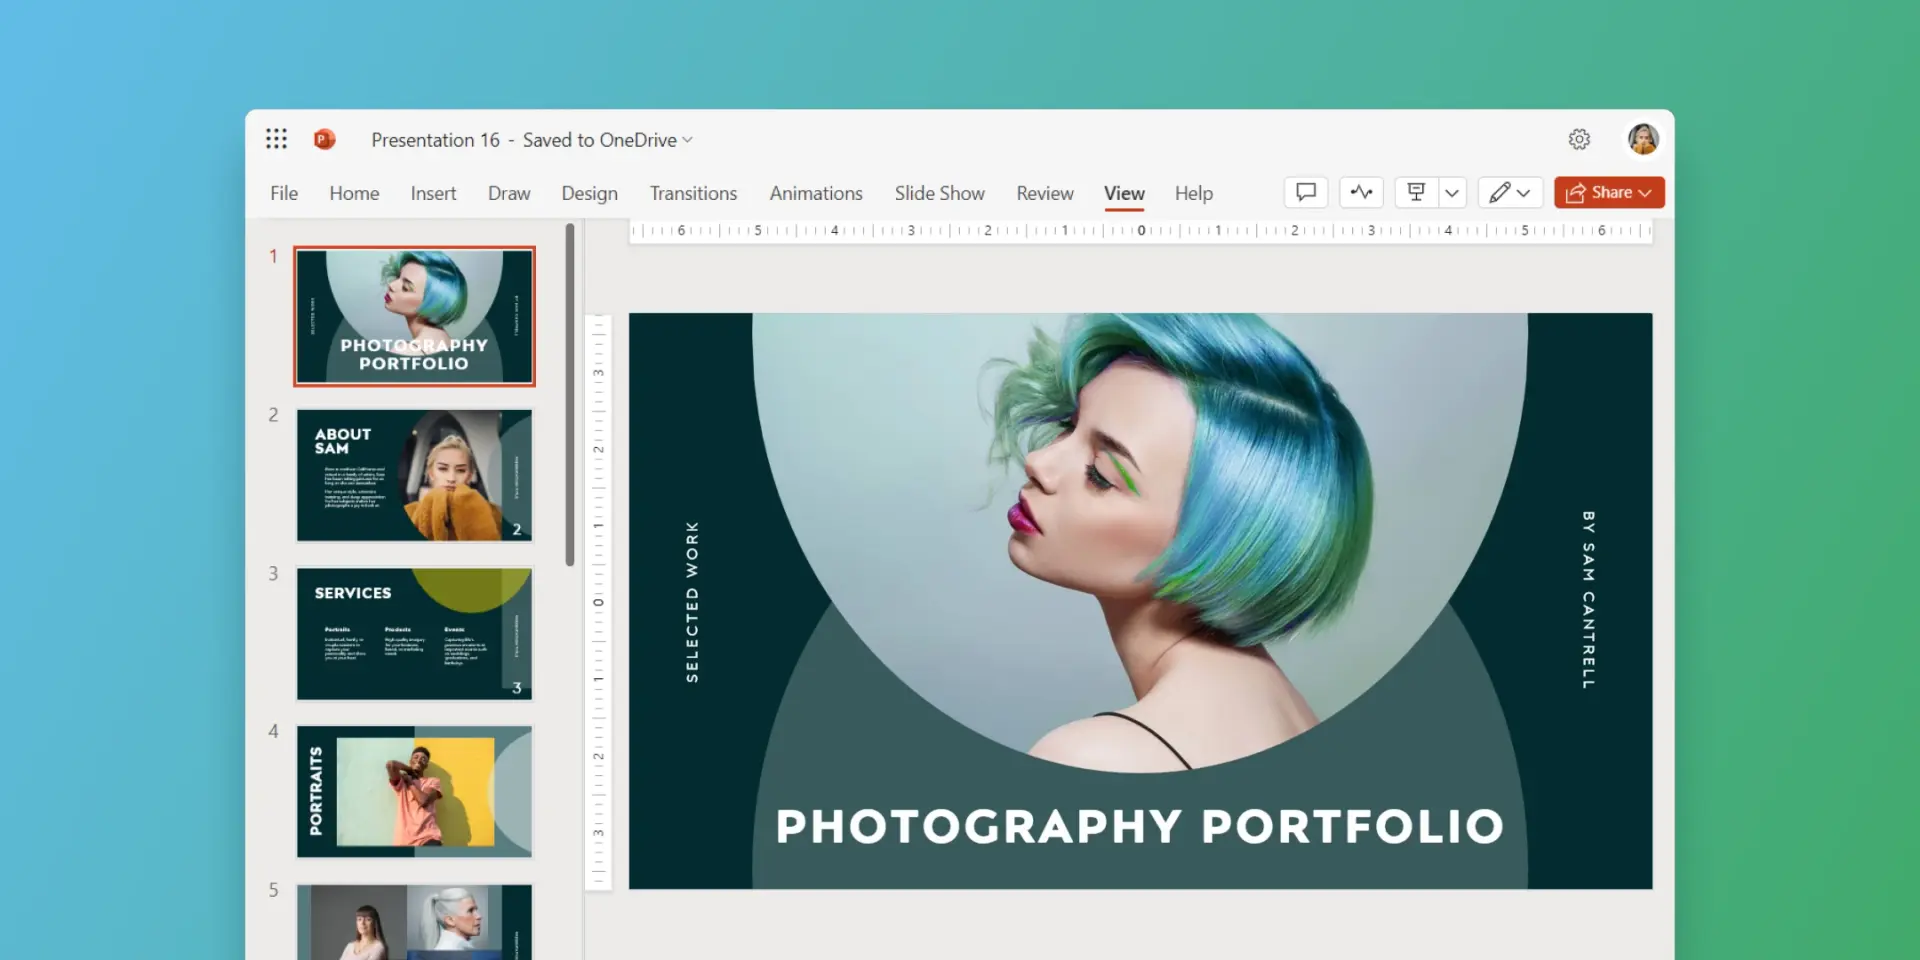 A PowerPoint deck showing a photography portfolio.